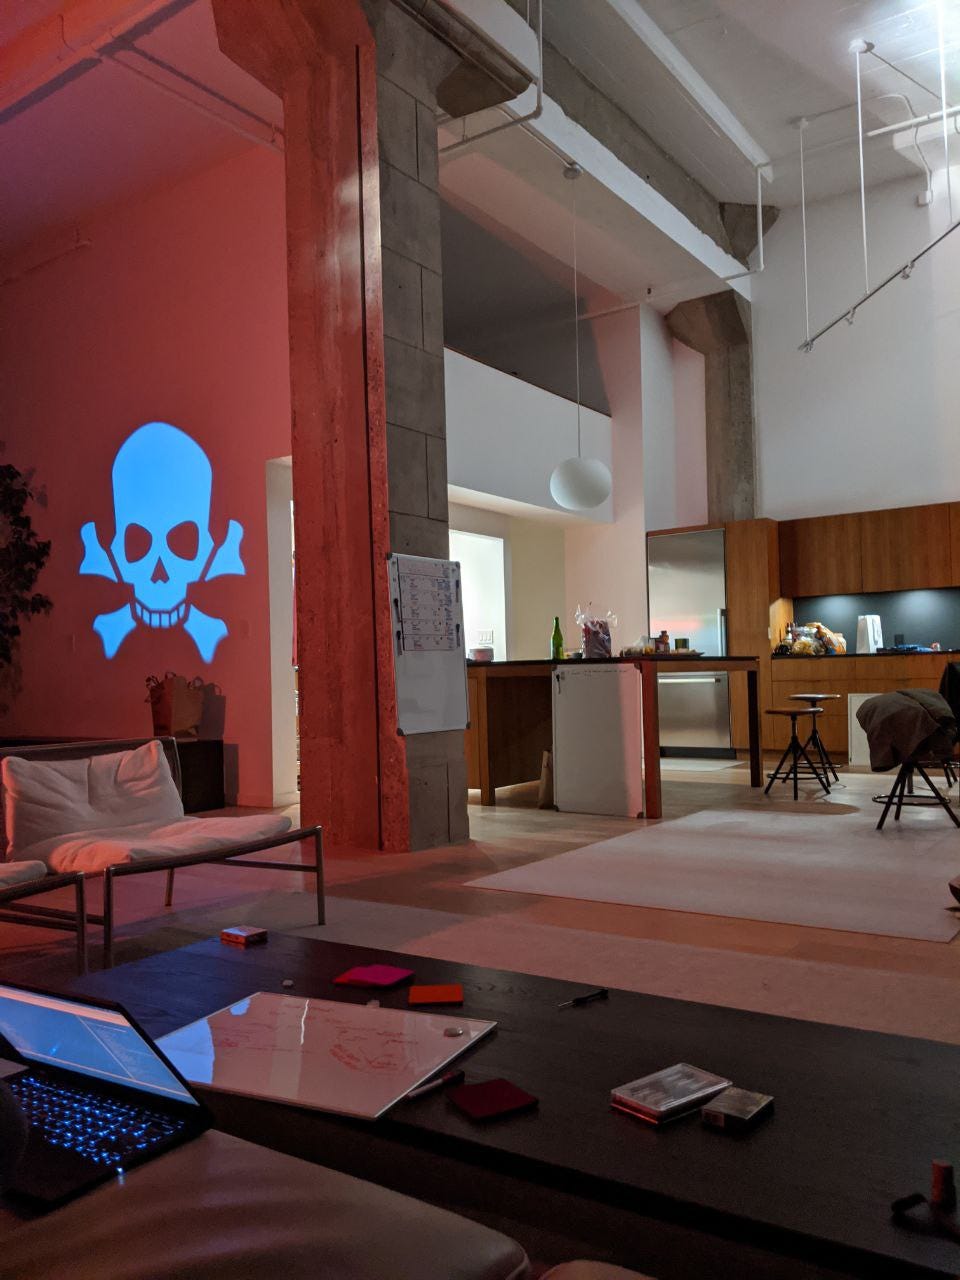 a stylish SF loft in the evening. A pirate skull and crossbones is projected onto the wall. Laptops, whiteboards, and other creative clutter is visible on every surface